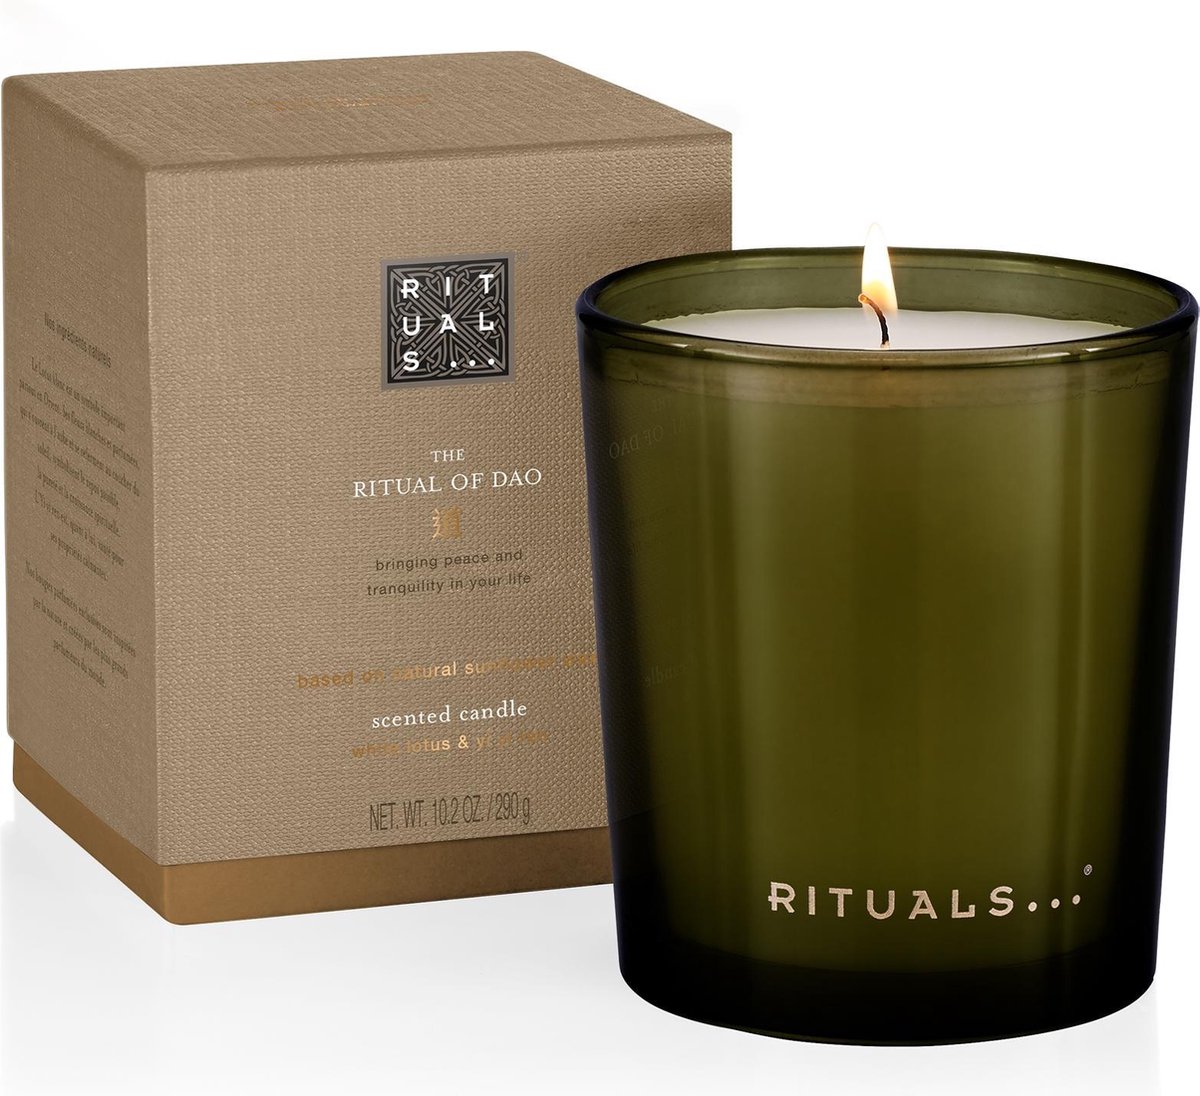 RITUALS The Ritual of Dao - Scented Candle Geurkaars - 290 g | bol.com